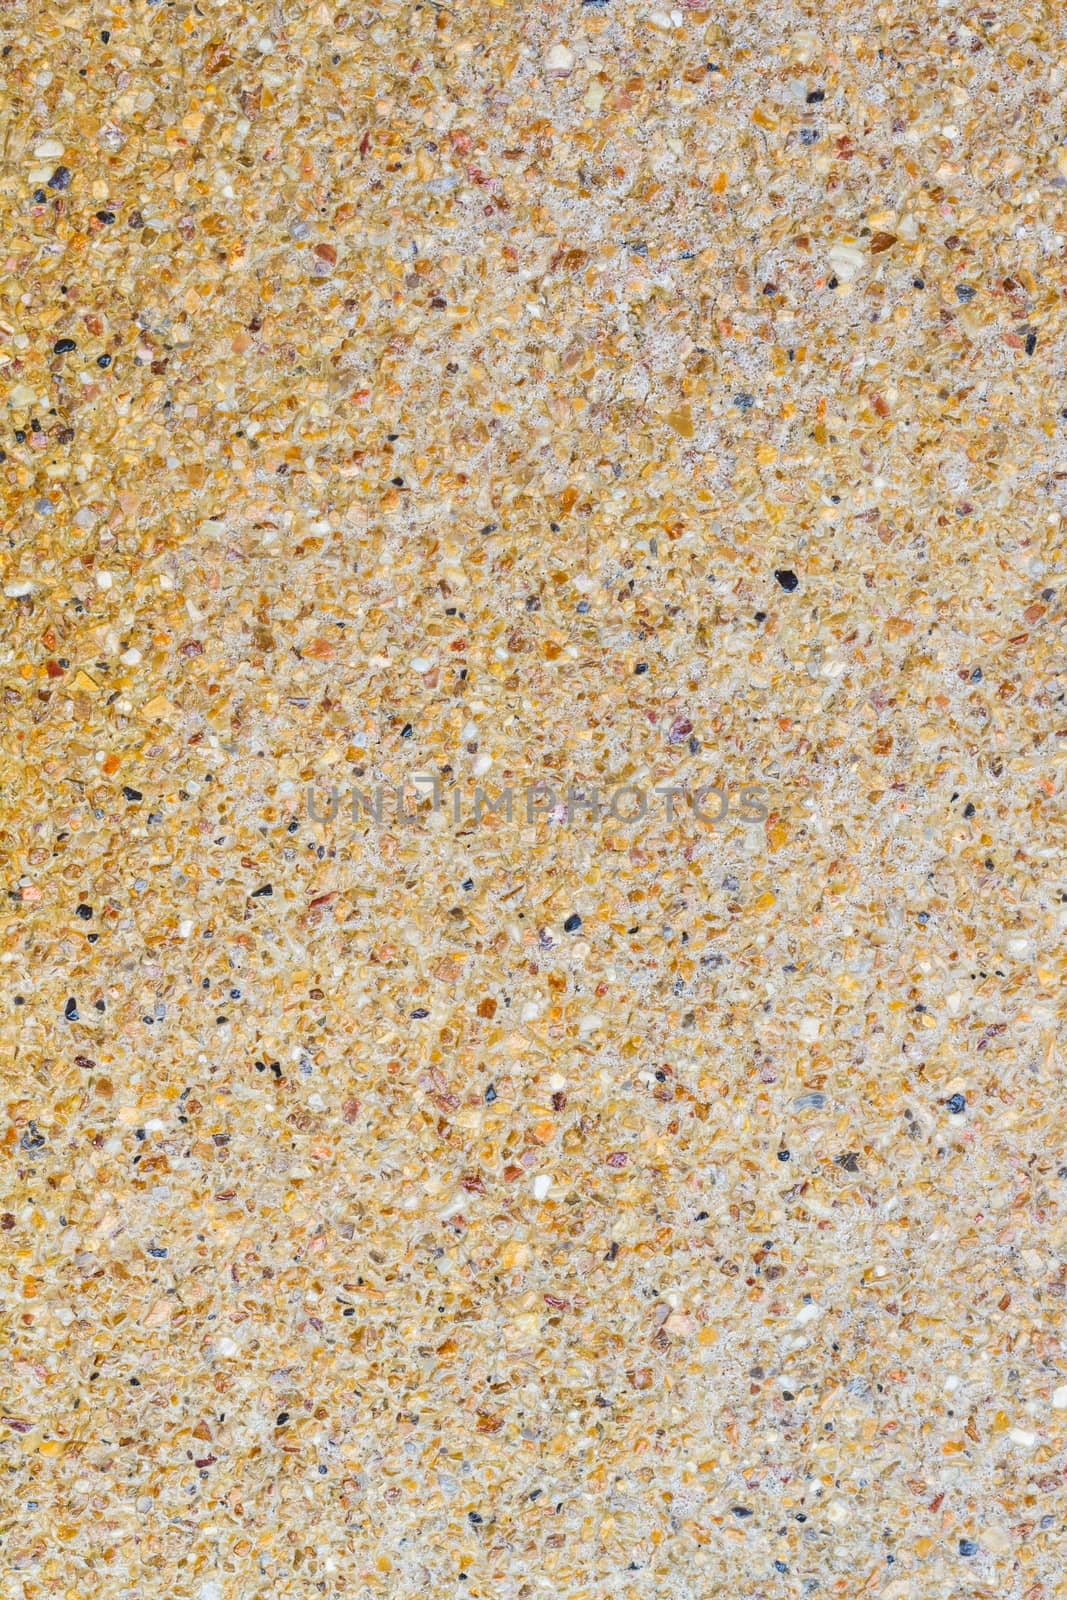 Abstract background with rounded pebble stones by a3701027